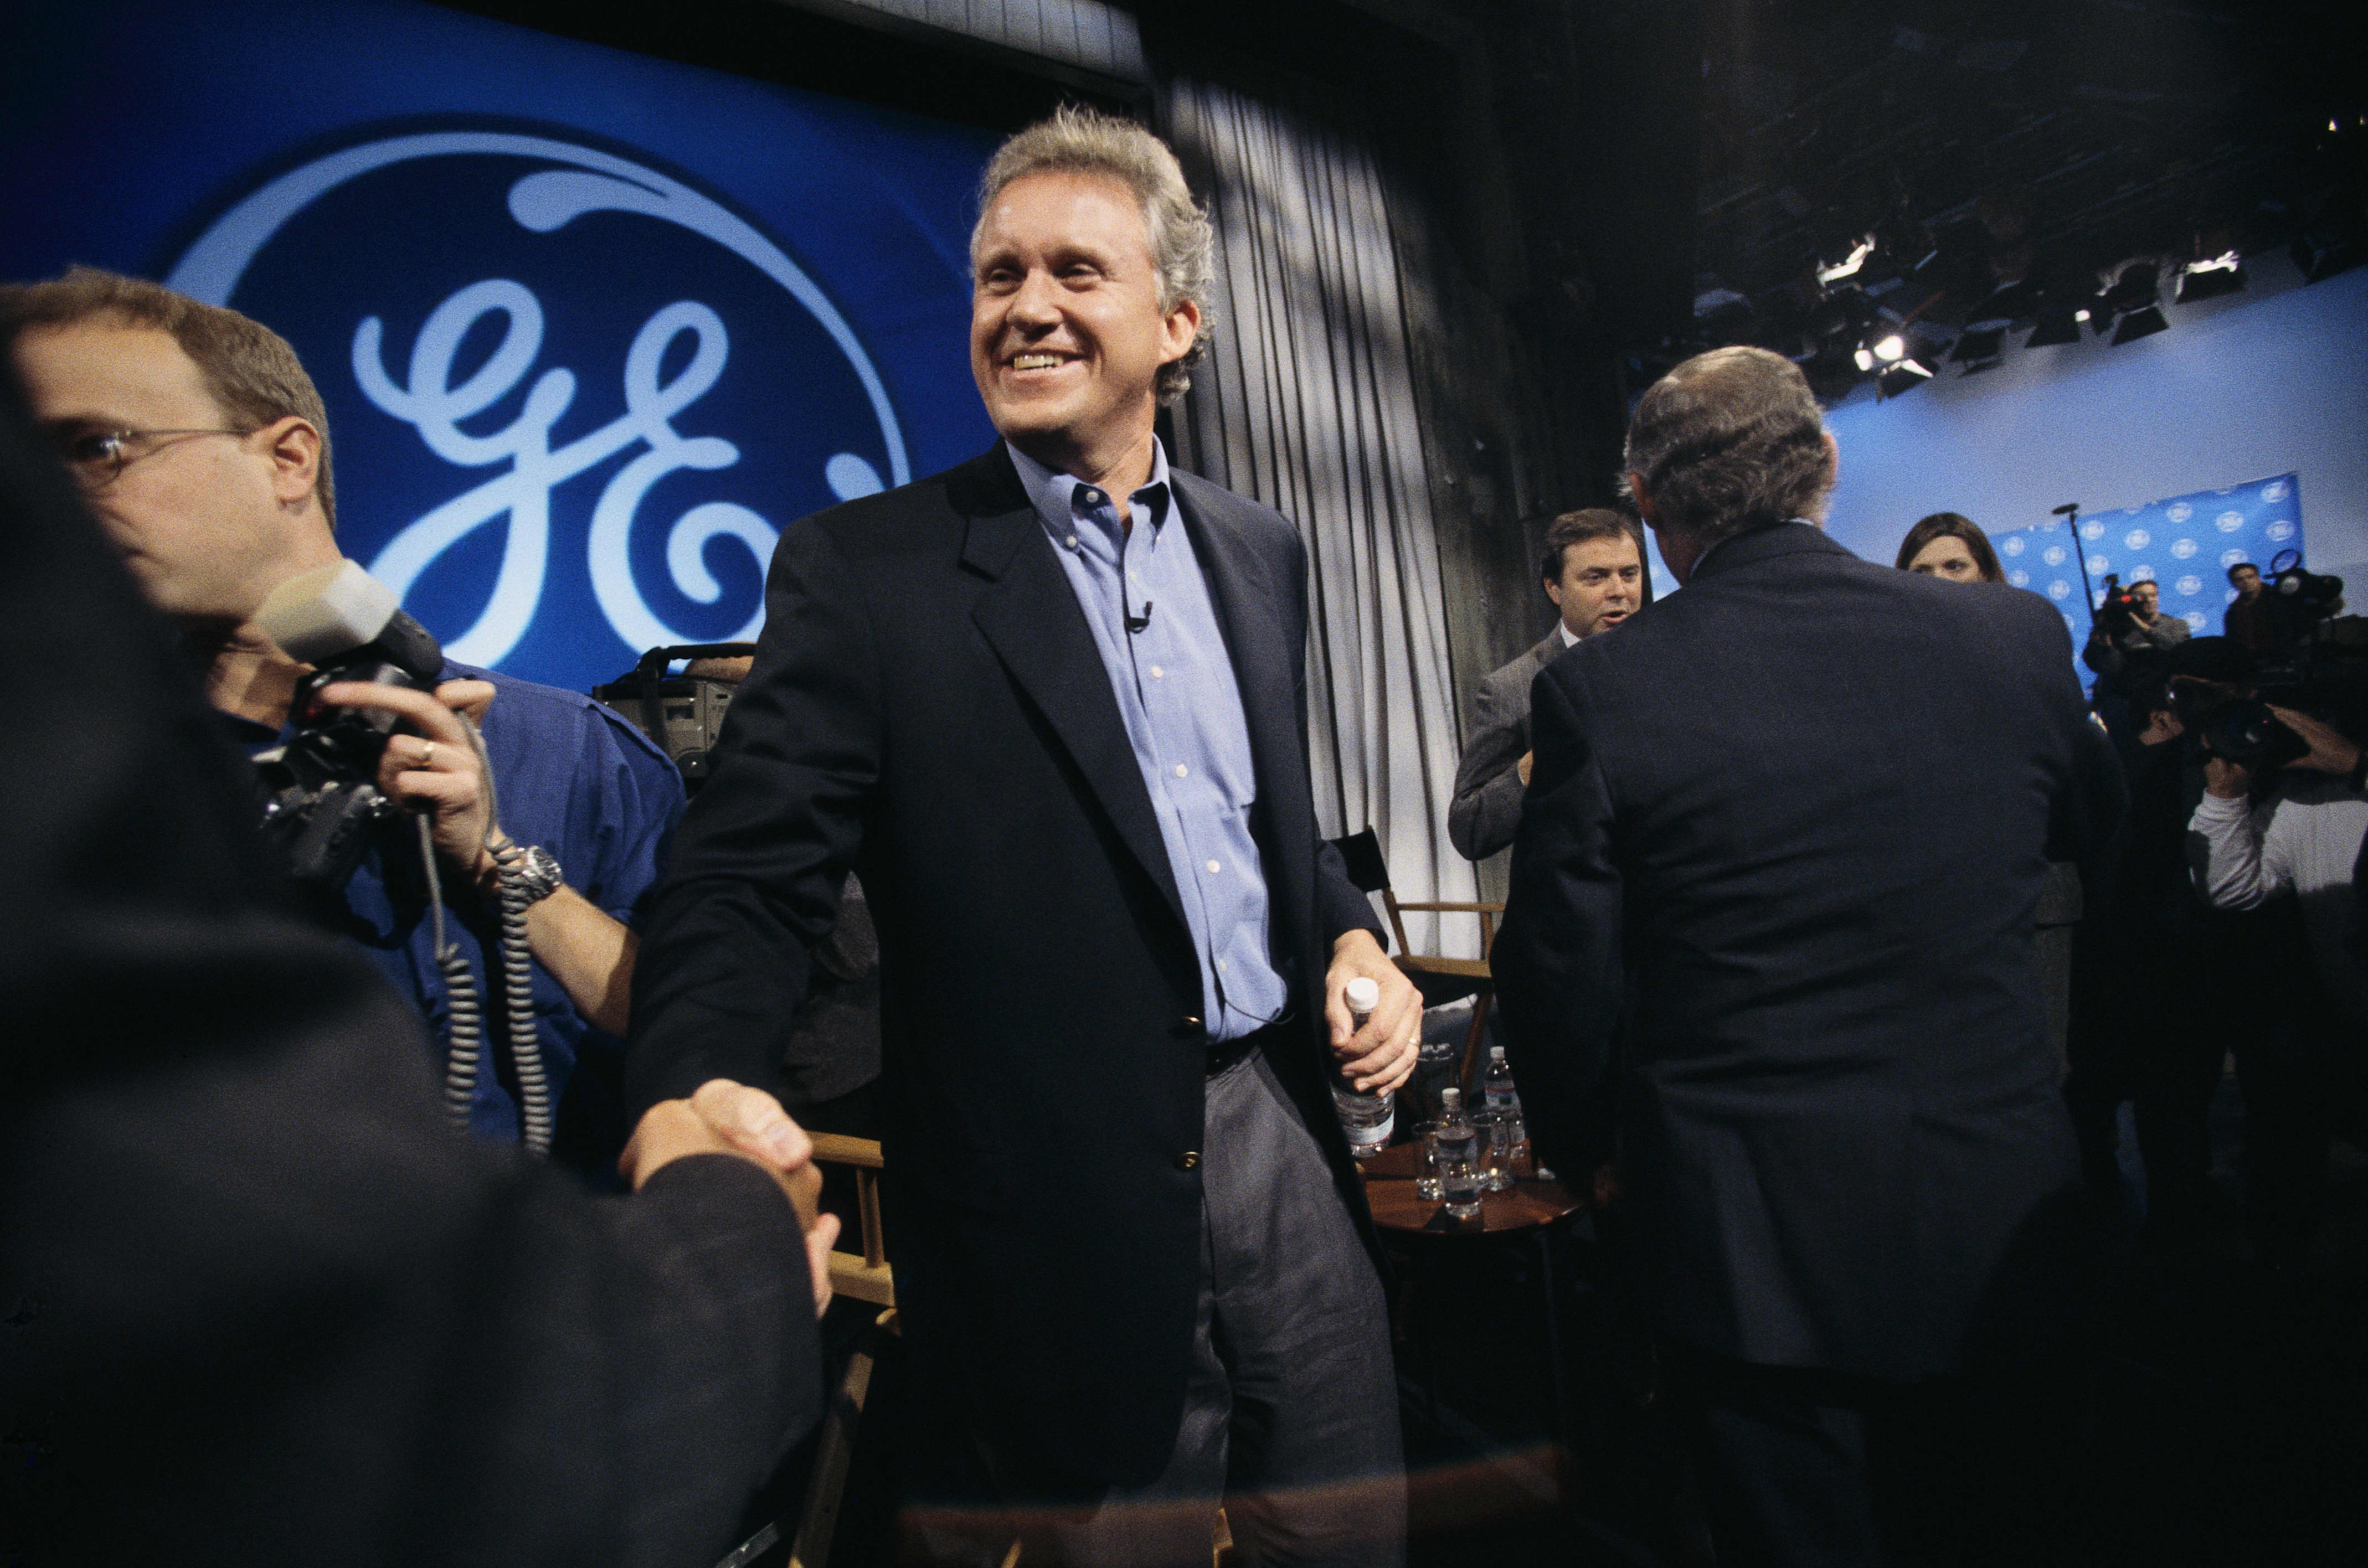 Jeff Immelt, the former CEO of GE, says he is “completely dissatisfied” with the story surrounding my term